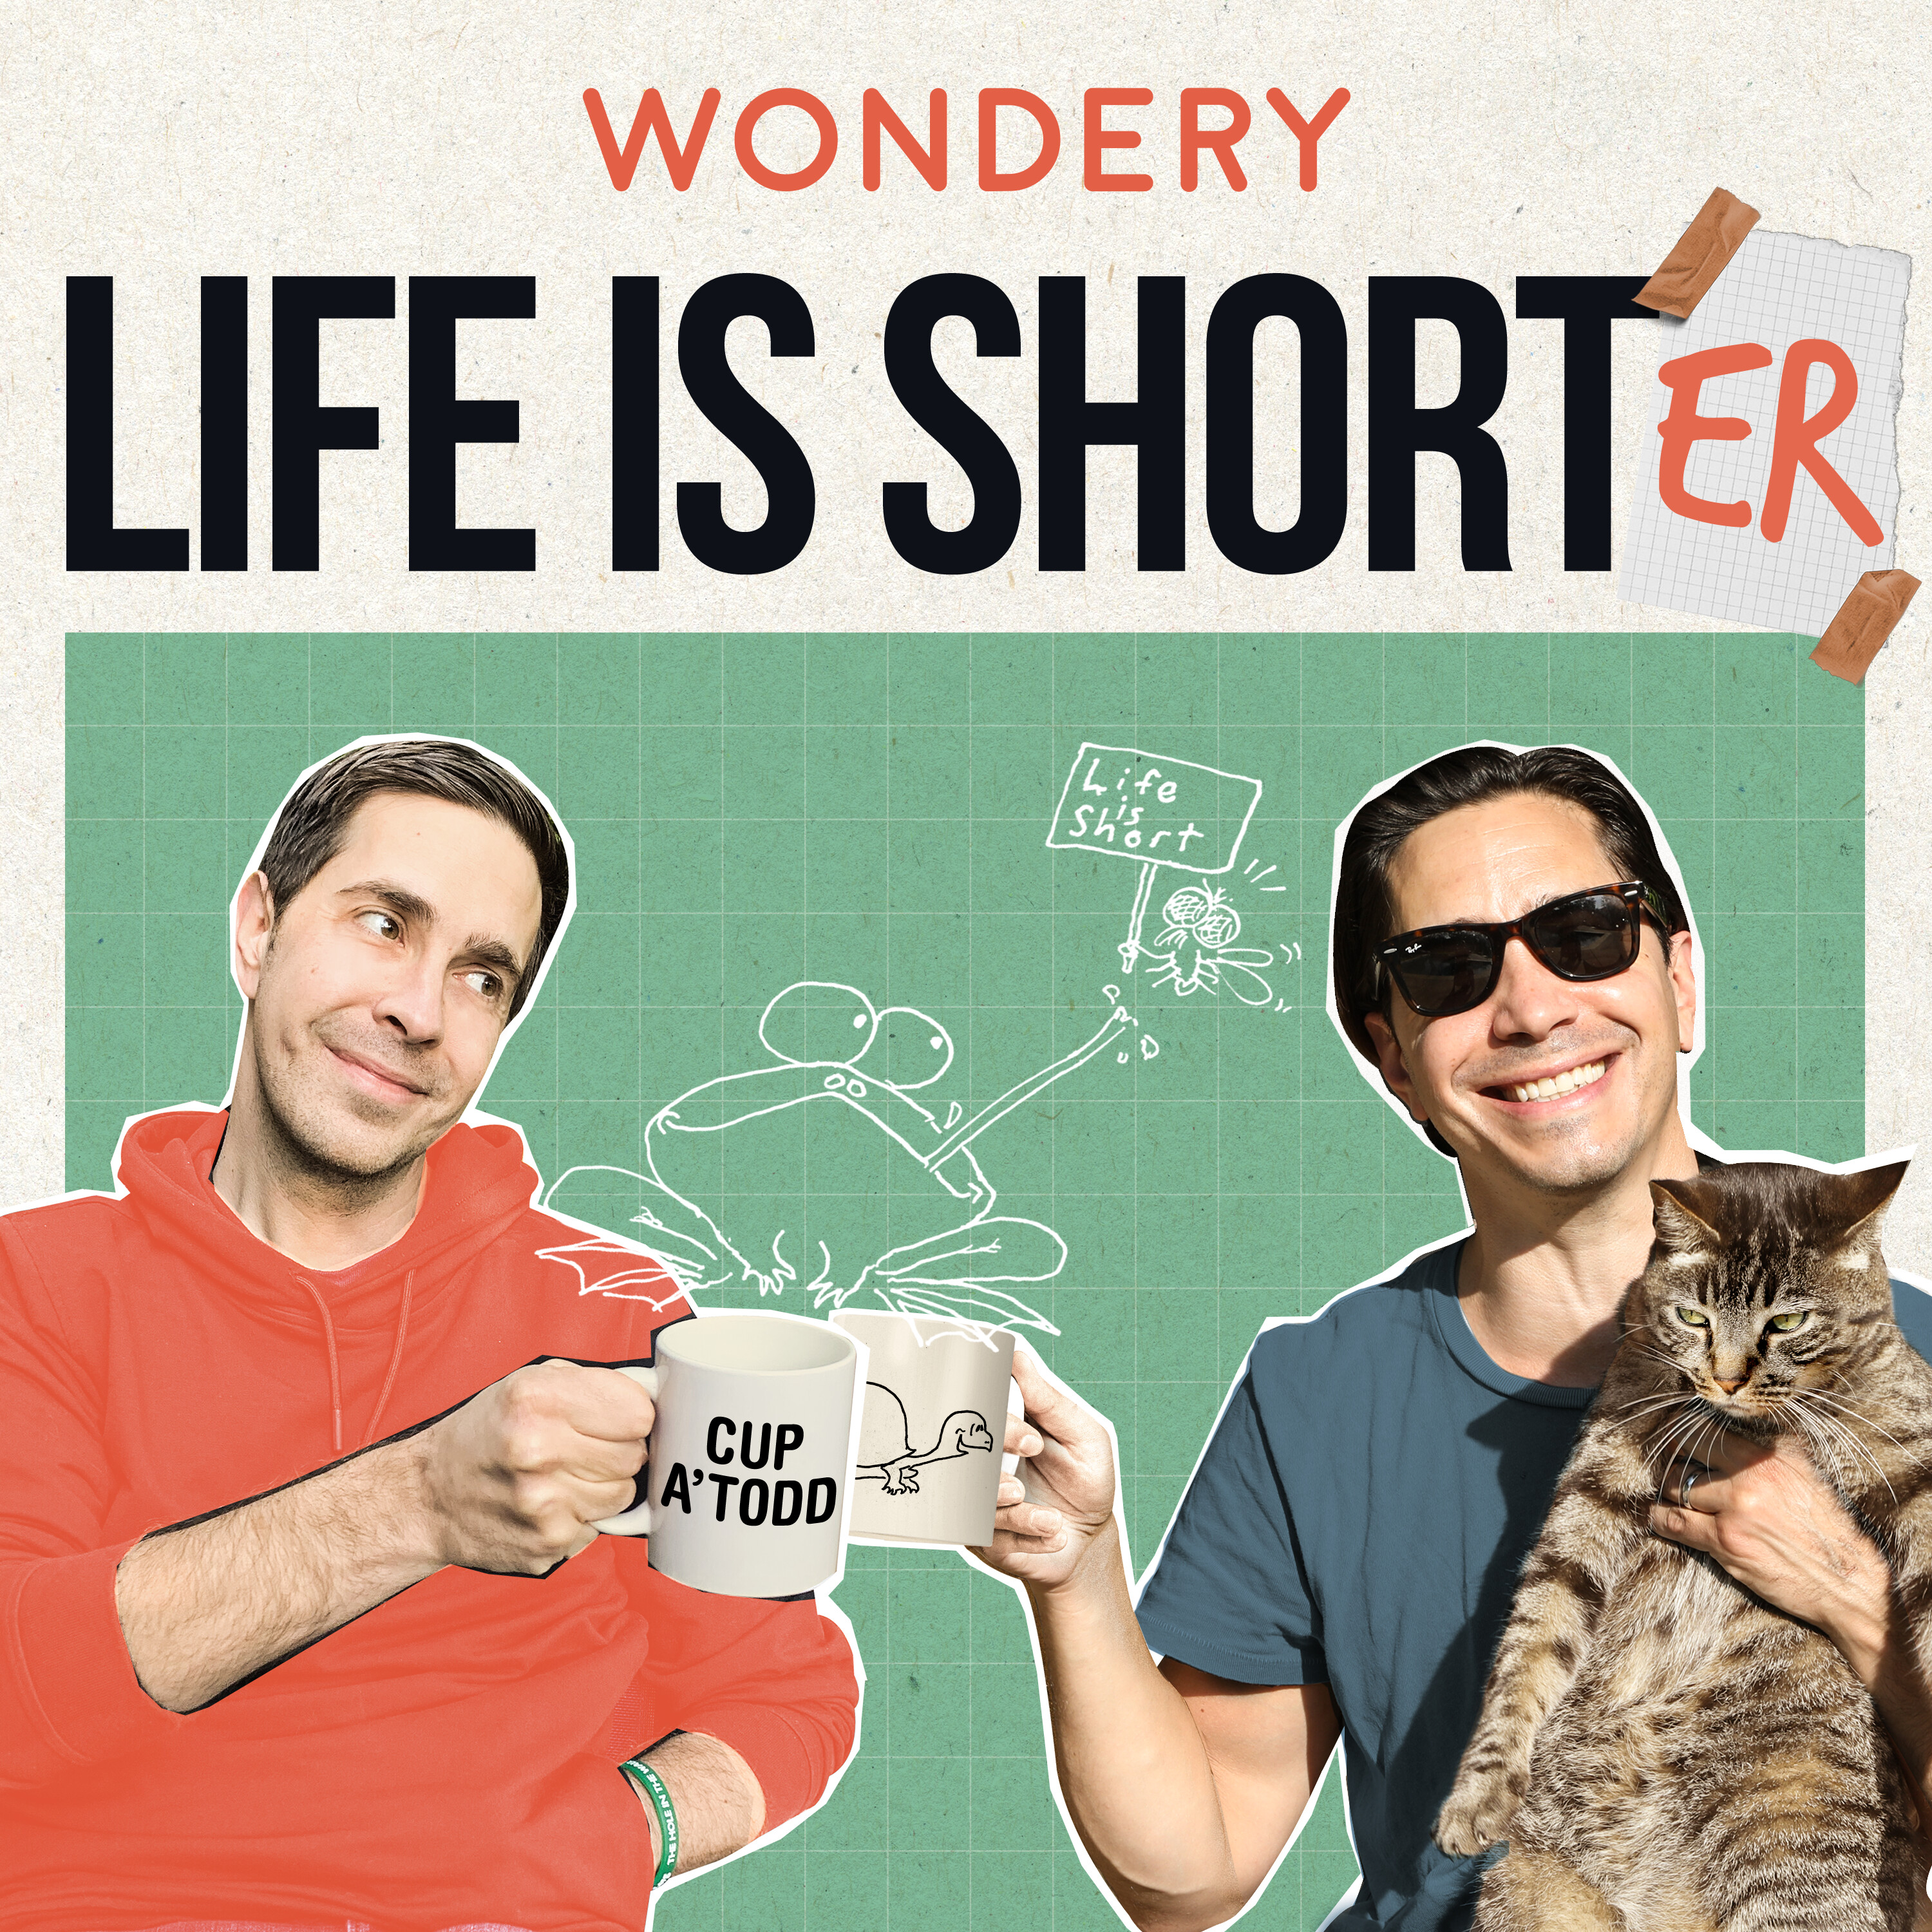 Life Is Short(er): Horny Twinkle, Teen Boy Energy, and Manly Men 🐷 by Wondery